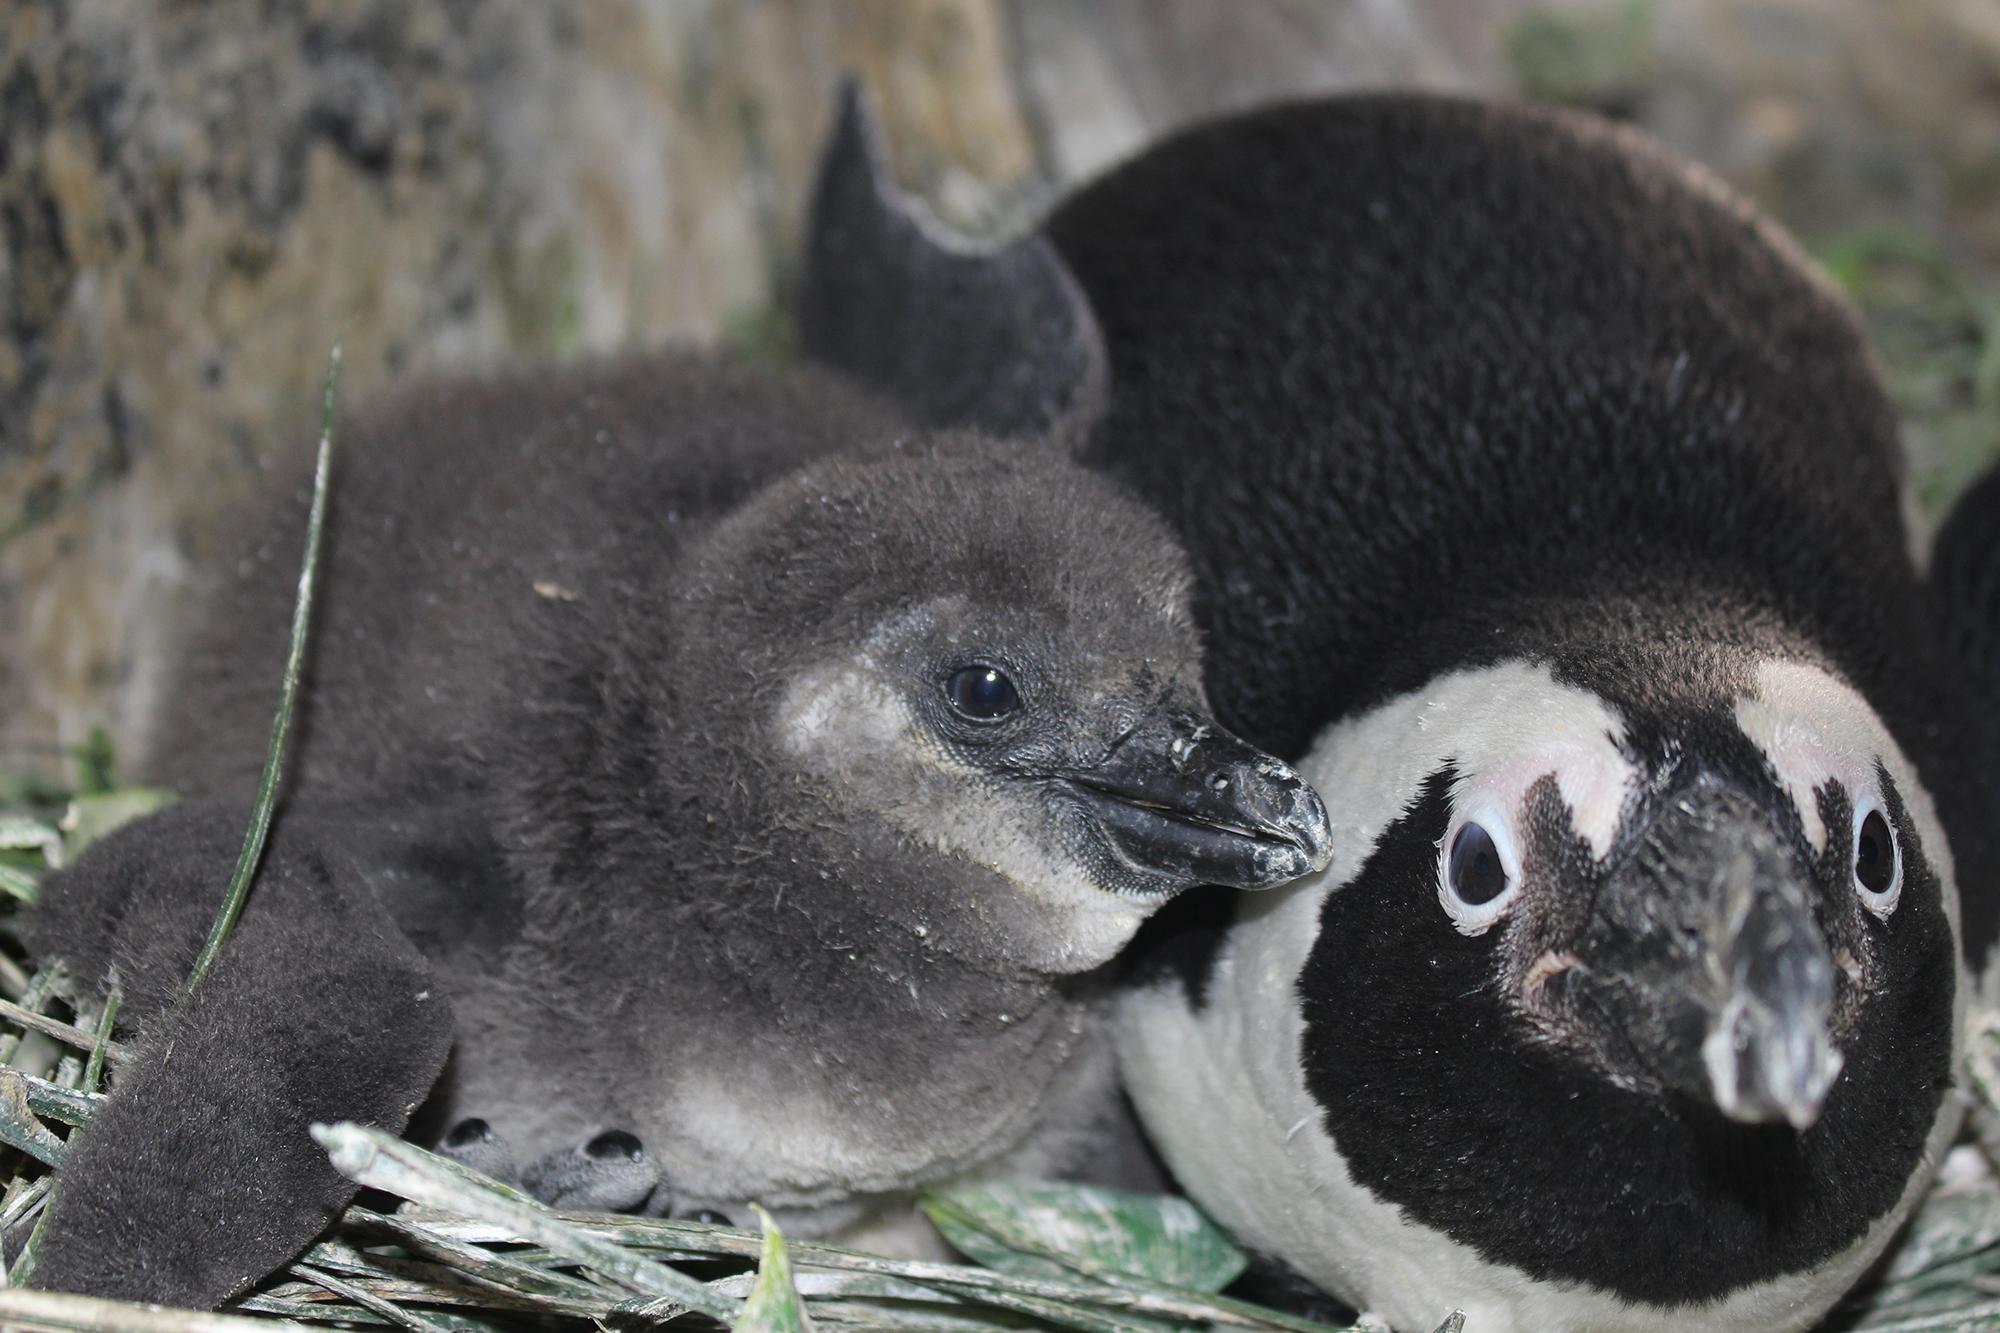 An African penguin chick hatched Feb. 10 at Lincoln Park Zoo, pictured here at 21 days old. (Courtesy Lincoln Park Zoo)